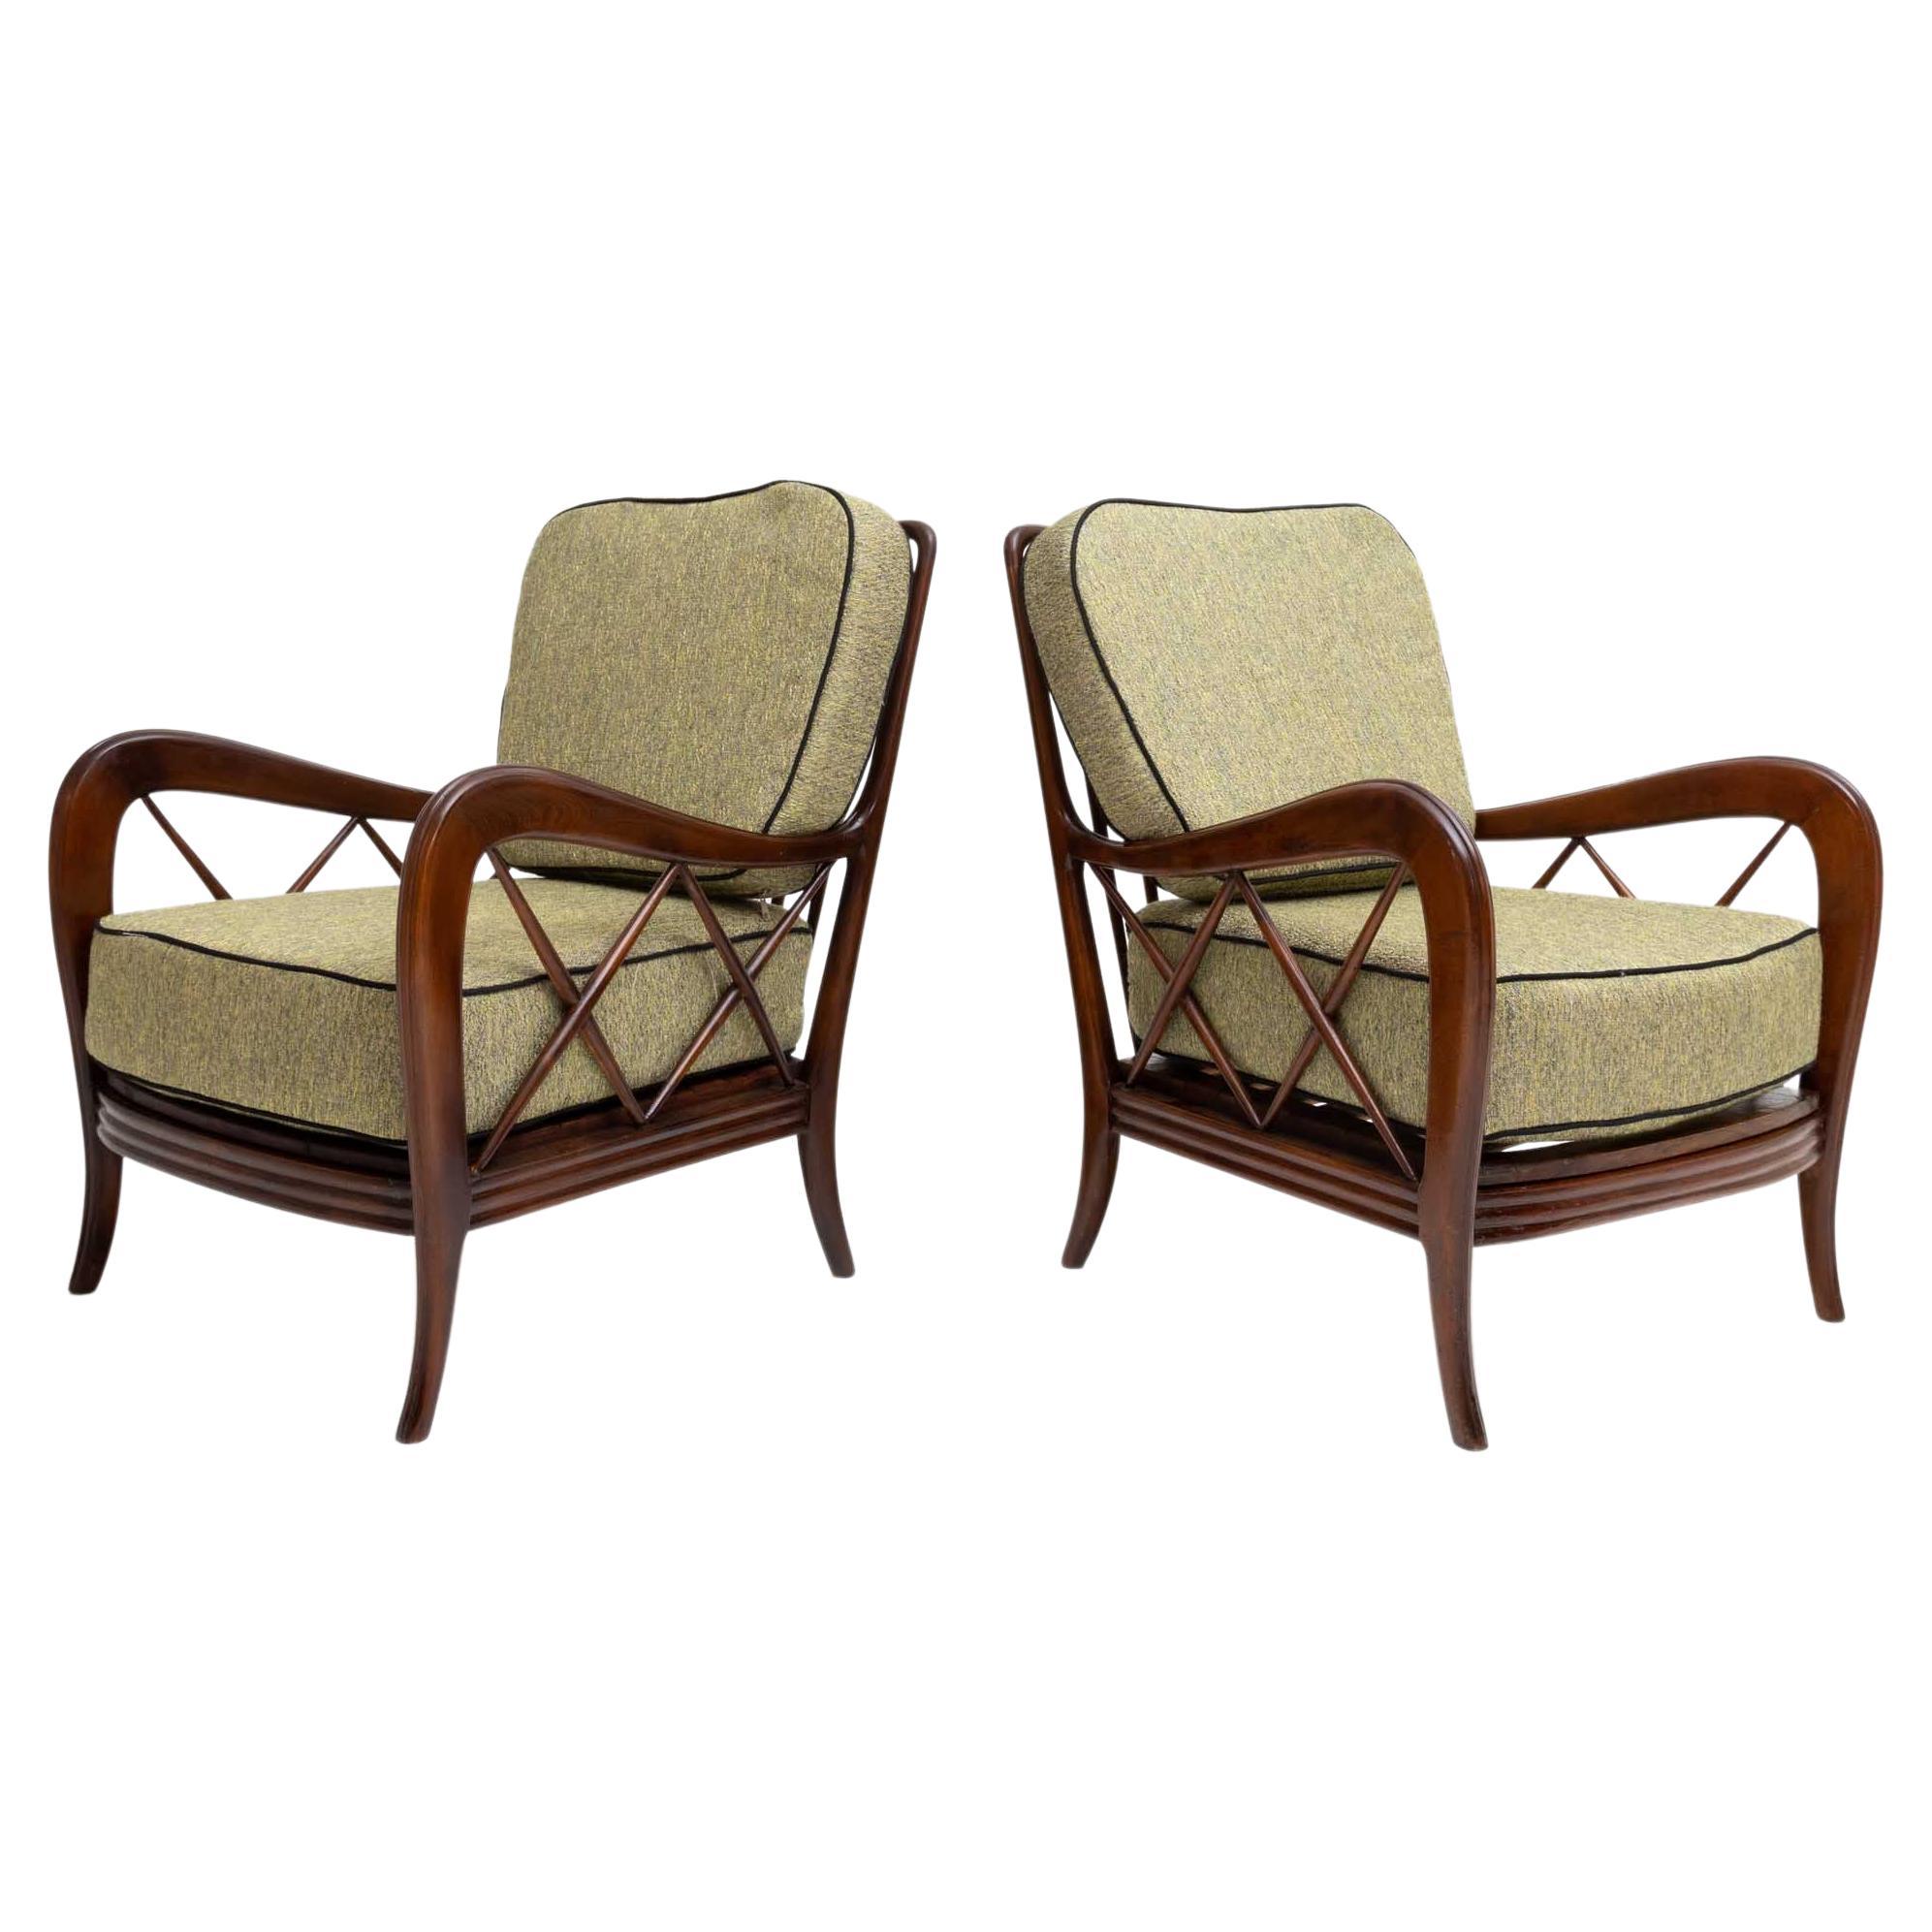 Pair of green Armchairs by Paolo Buffa, polished and reupholstered, Italy, 1940s